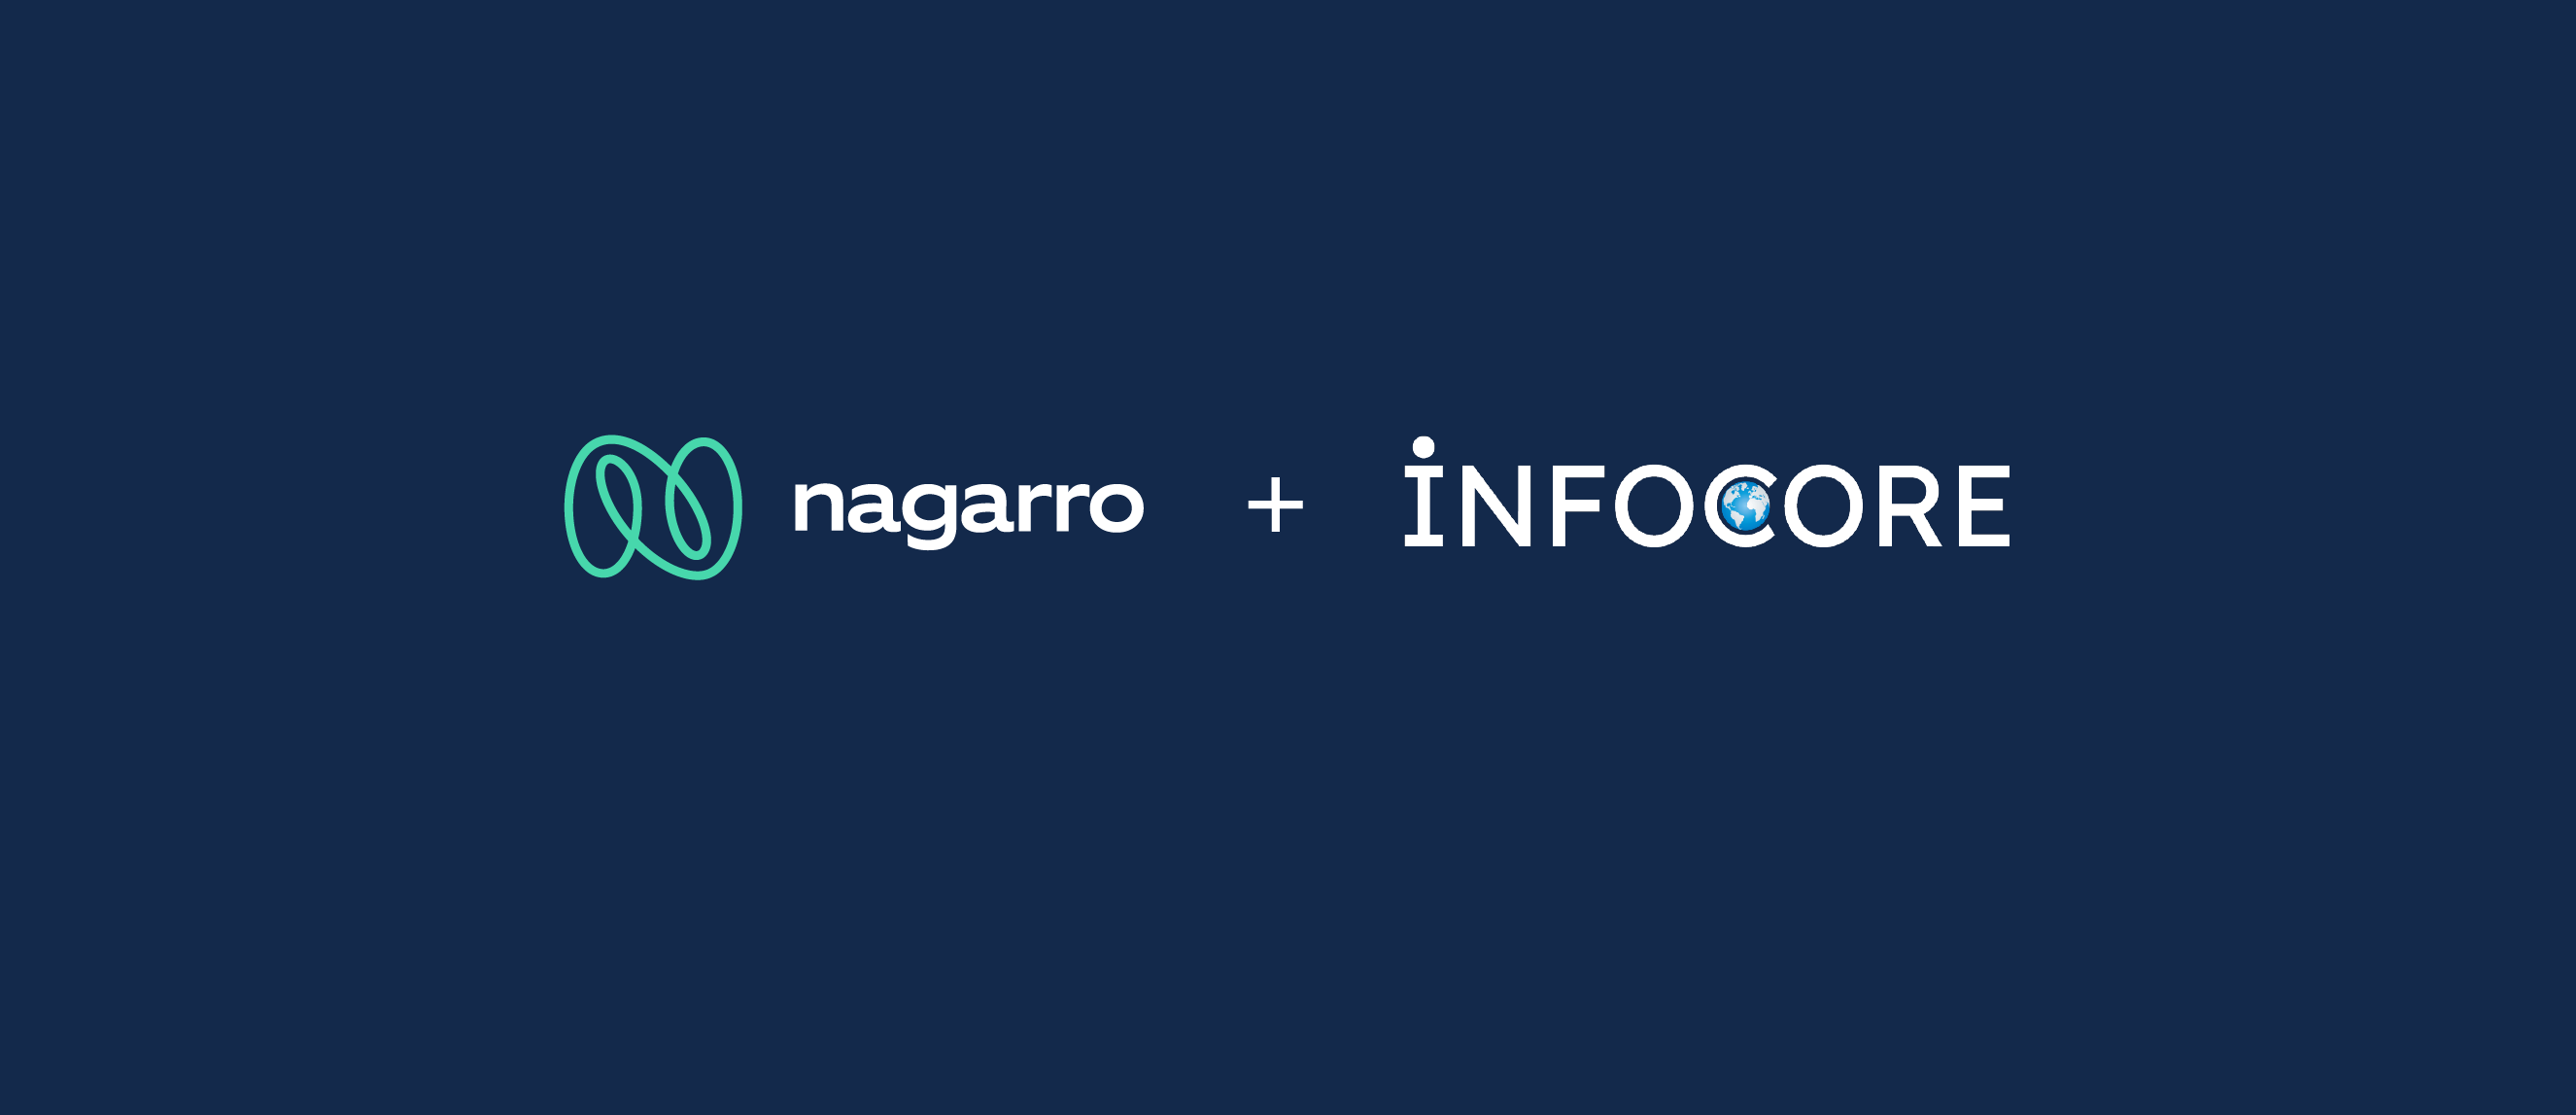 Nagarro acquires Infocore group to enhance Industry 4.0 offerings